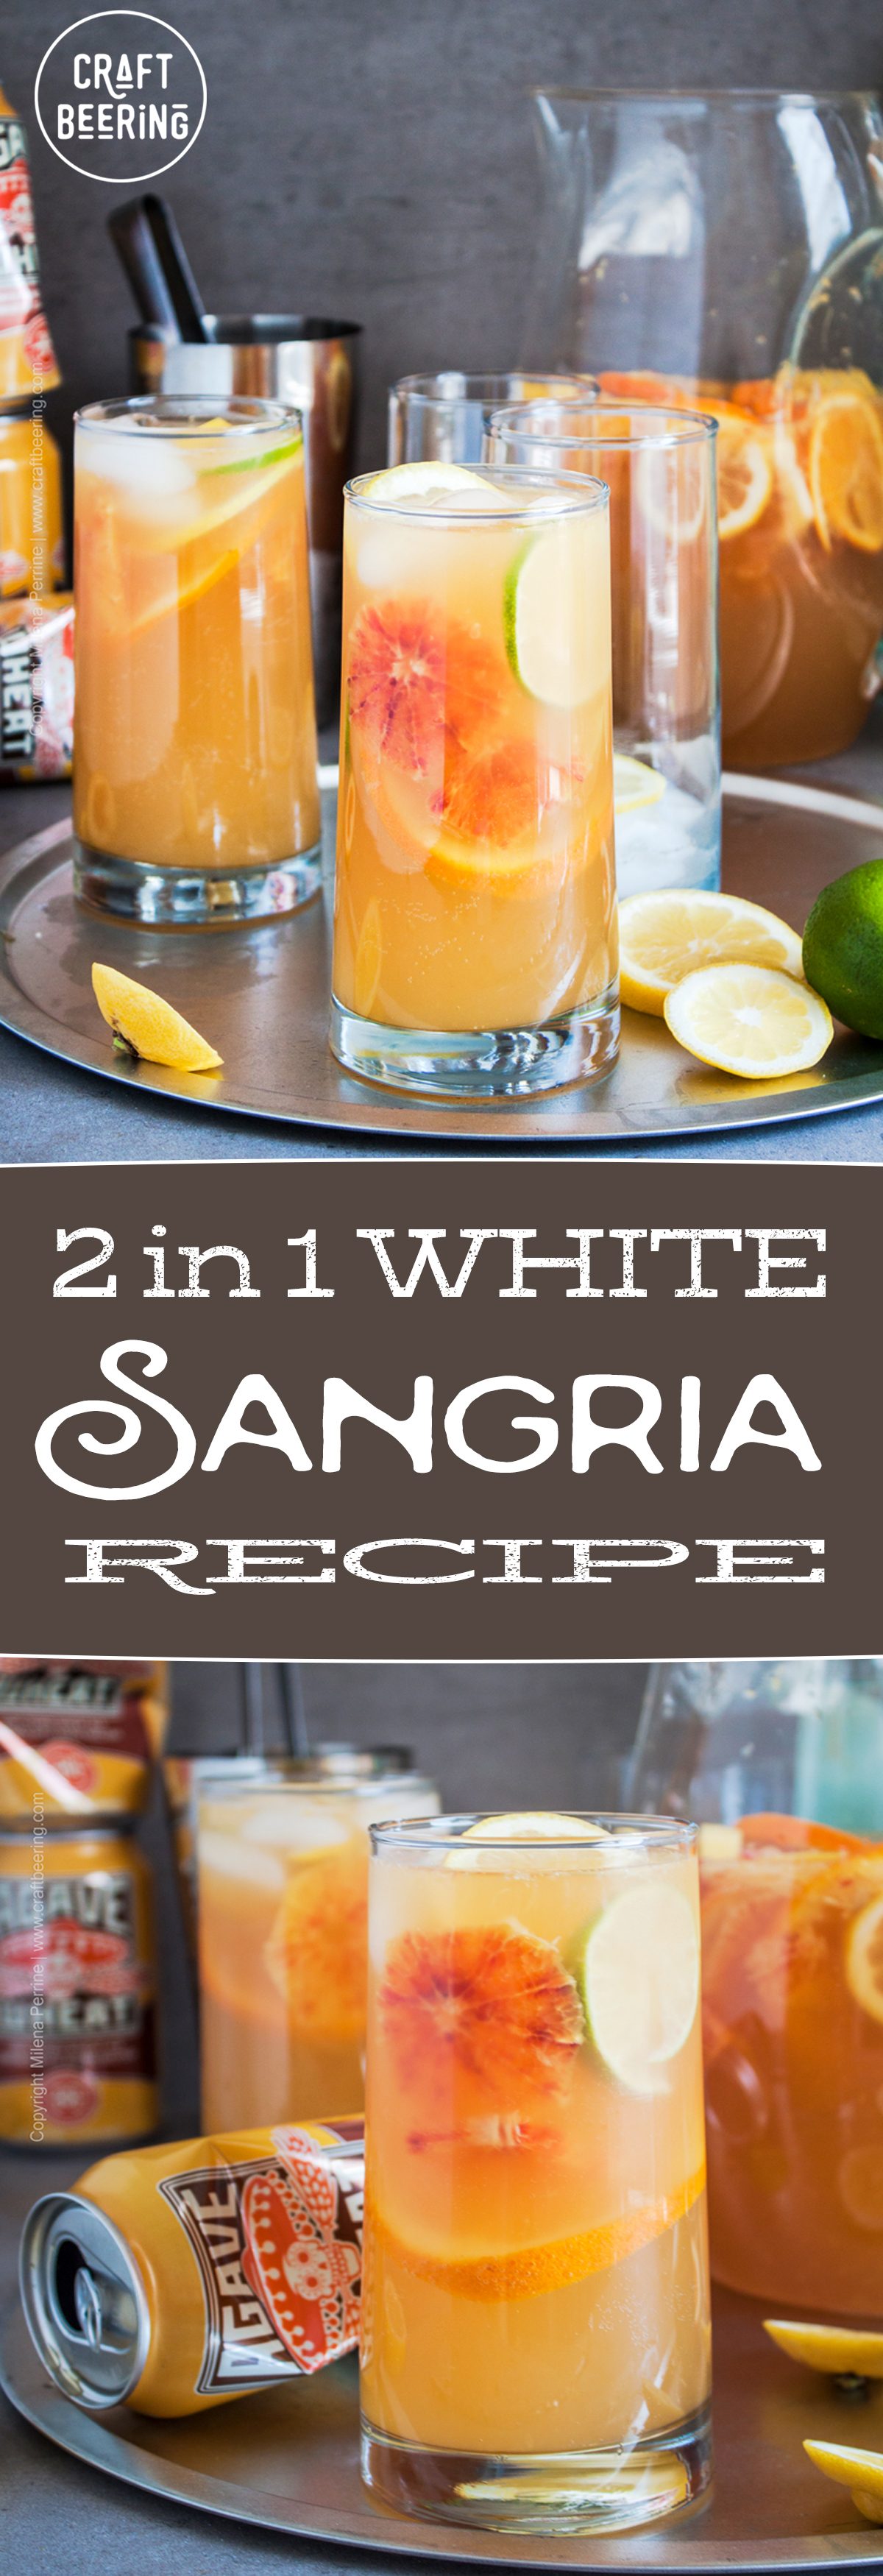 White Sangria 2 in 1 recipe. White rum and white wine or wheat beer, customize fruit and juice according to the wine or beer profiles. #whitesangria #summersangria